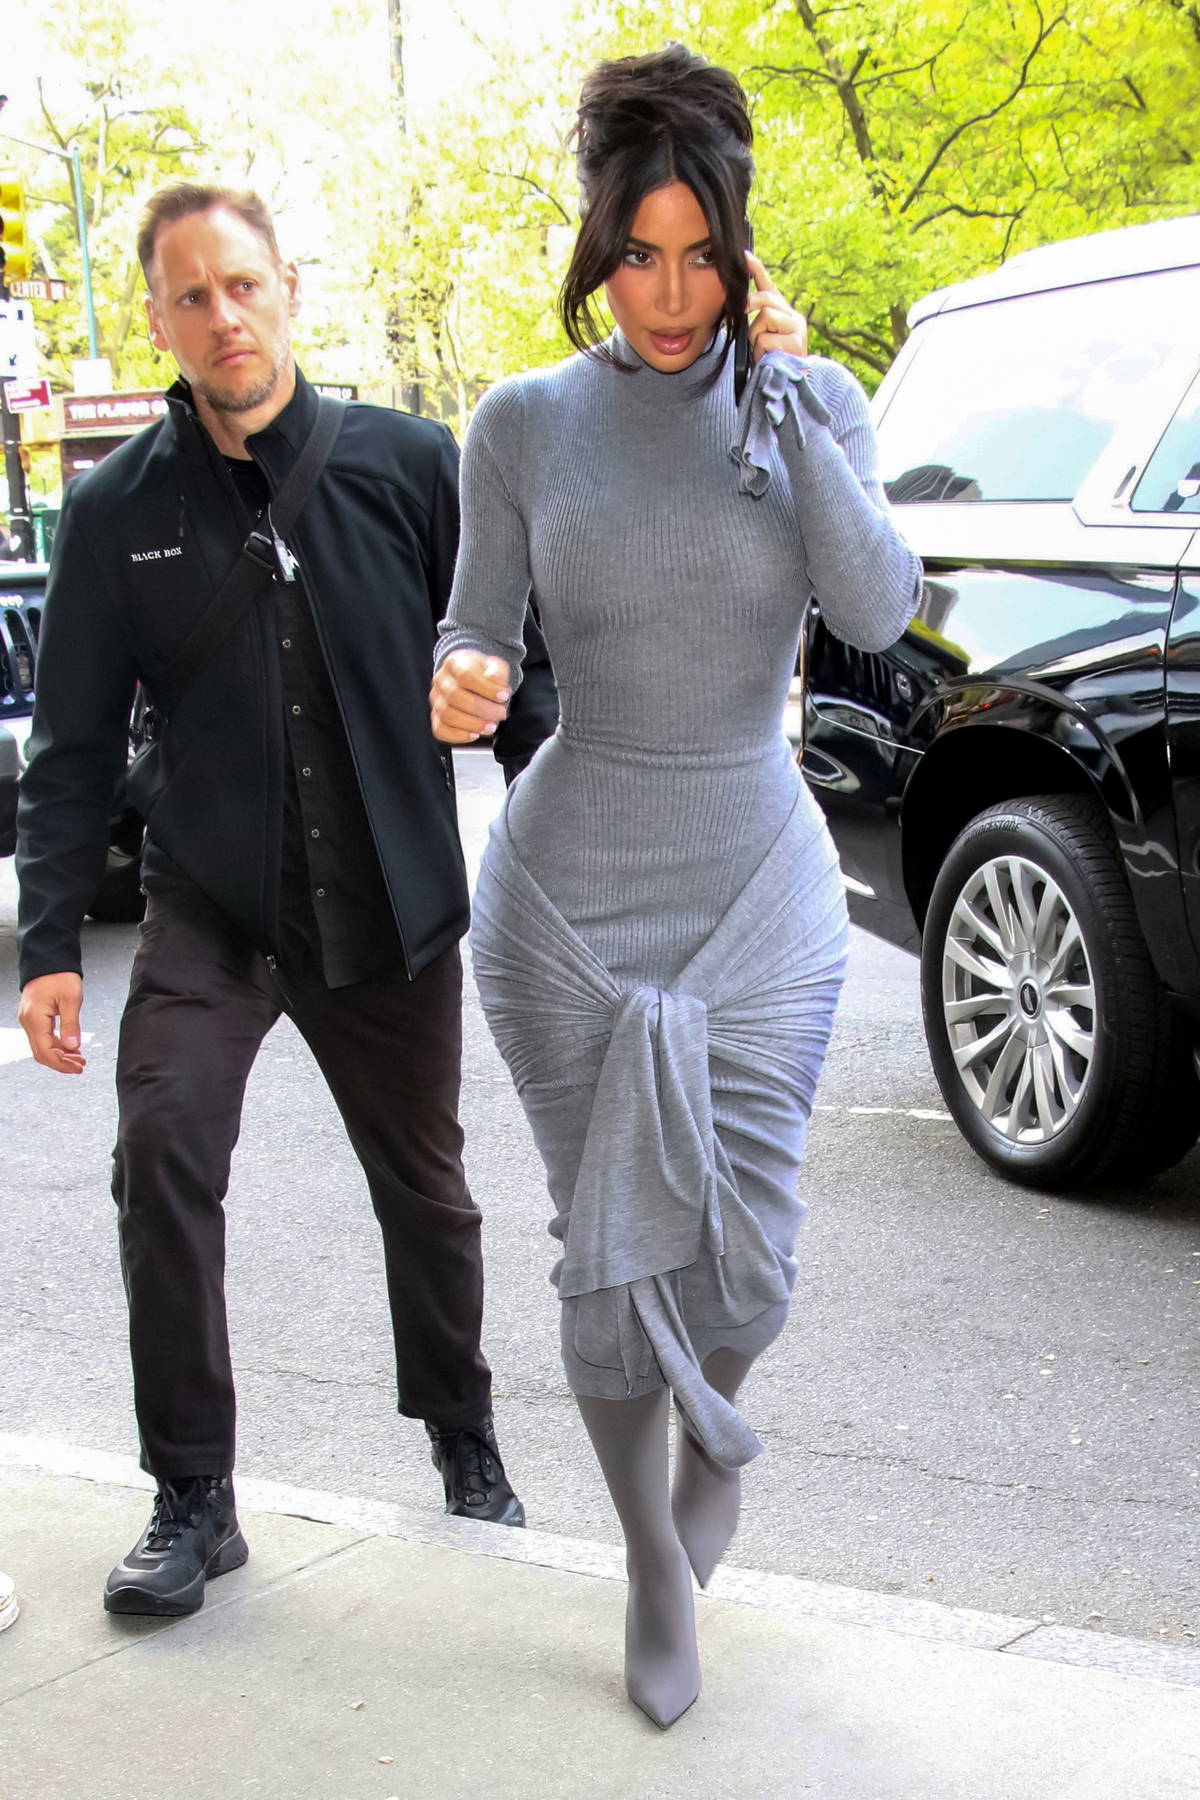 Kim Kardashian displays her famous curves in a grey body-hugging dress while  visiting an office building in New York City-260423_16